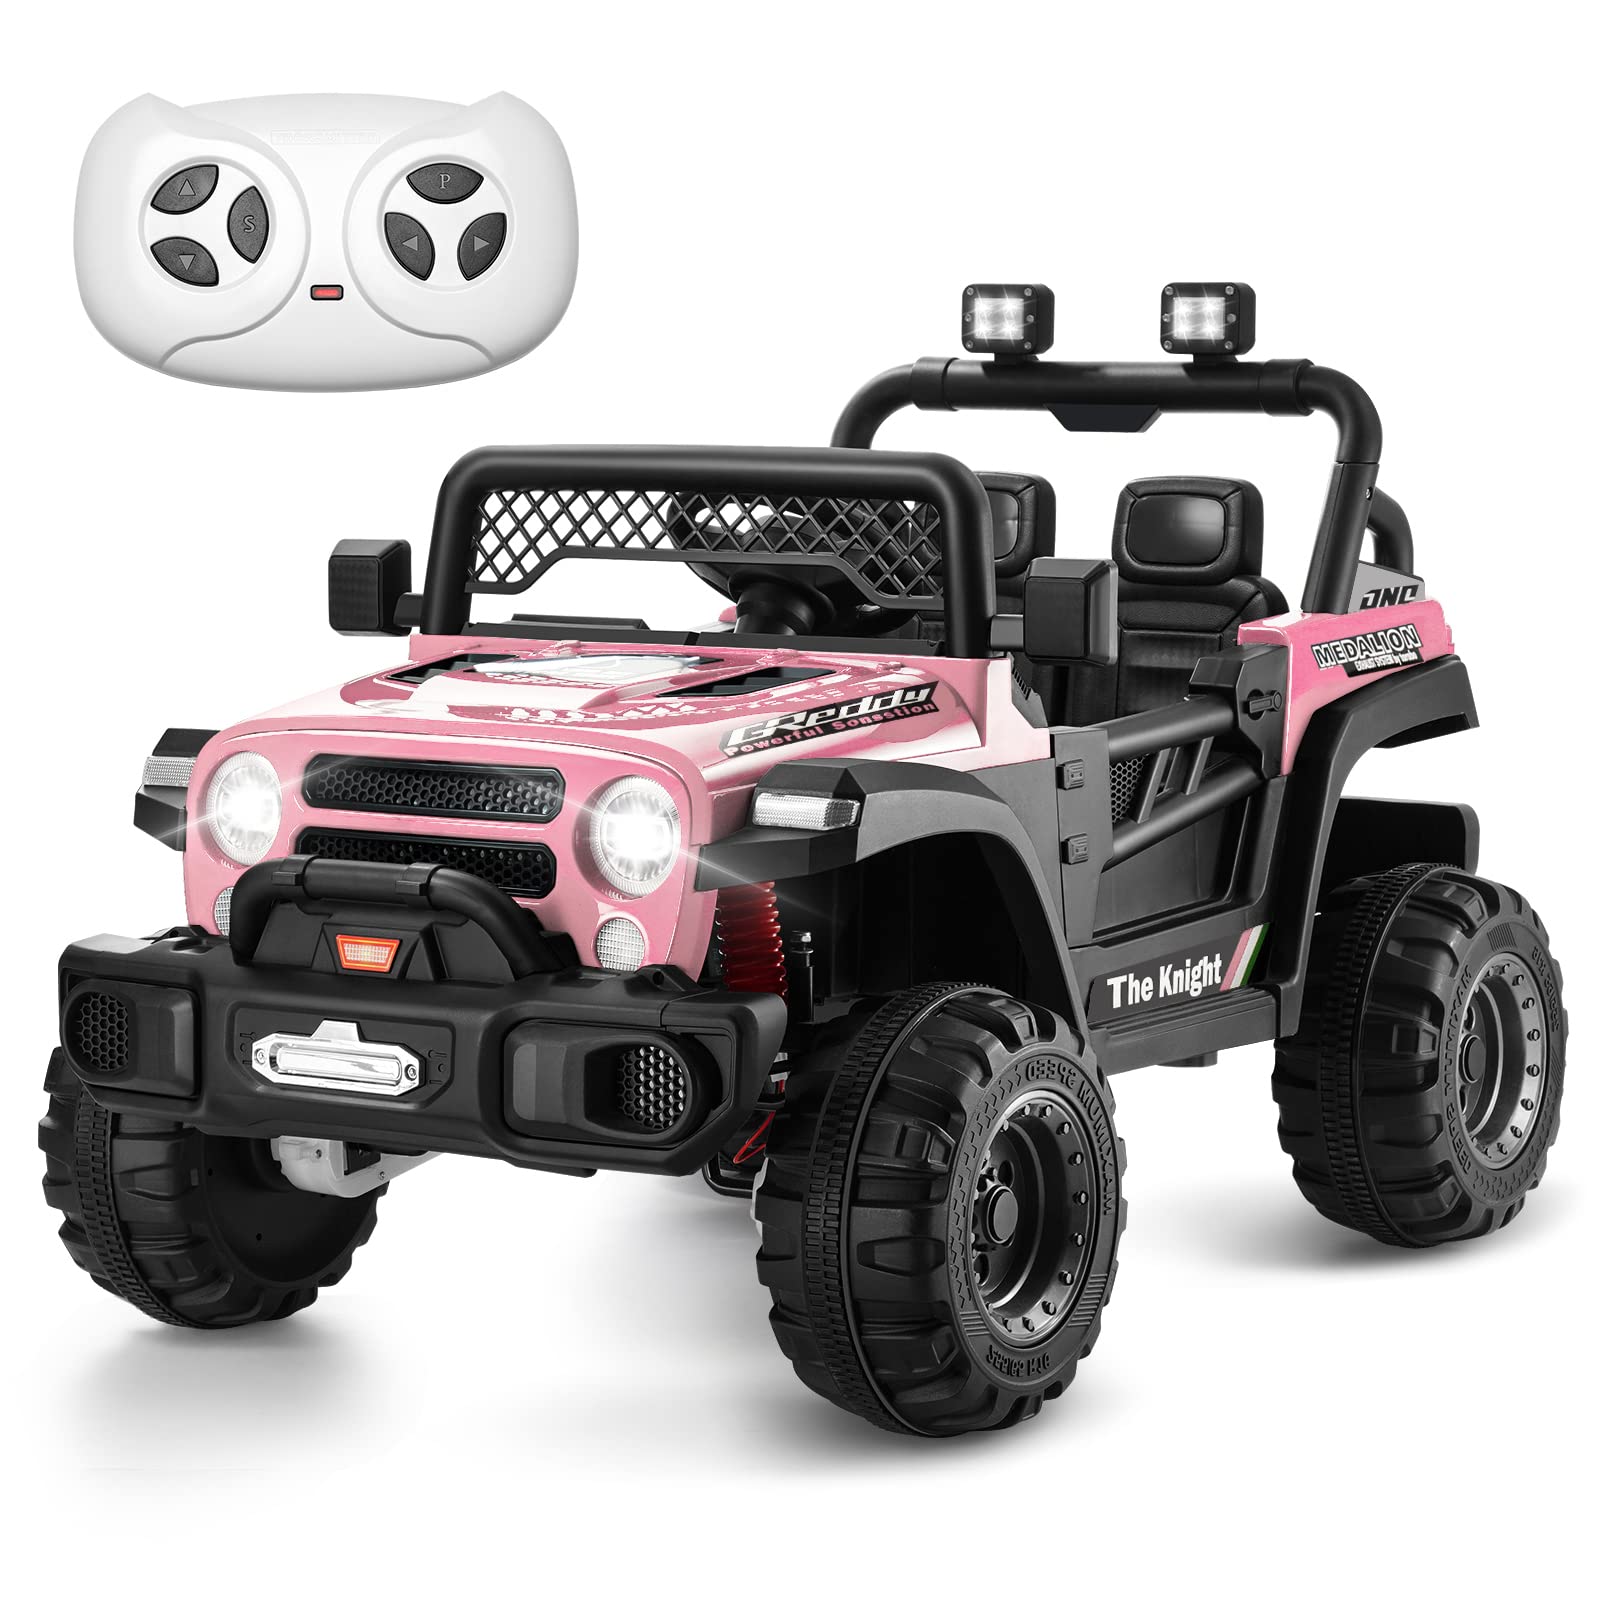 TEOAYEAH 4WD Electric Car for Kids, 12V Battery Powered Wheels with Manual/Parent Control, Seatbelt, Spring Suspension, Storage Trunk, Wireless Music/USB, Ideal Gift to Kids